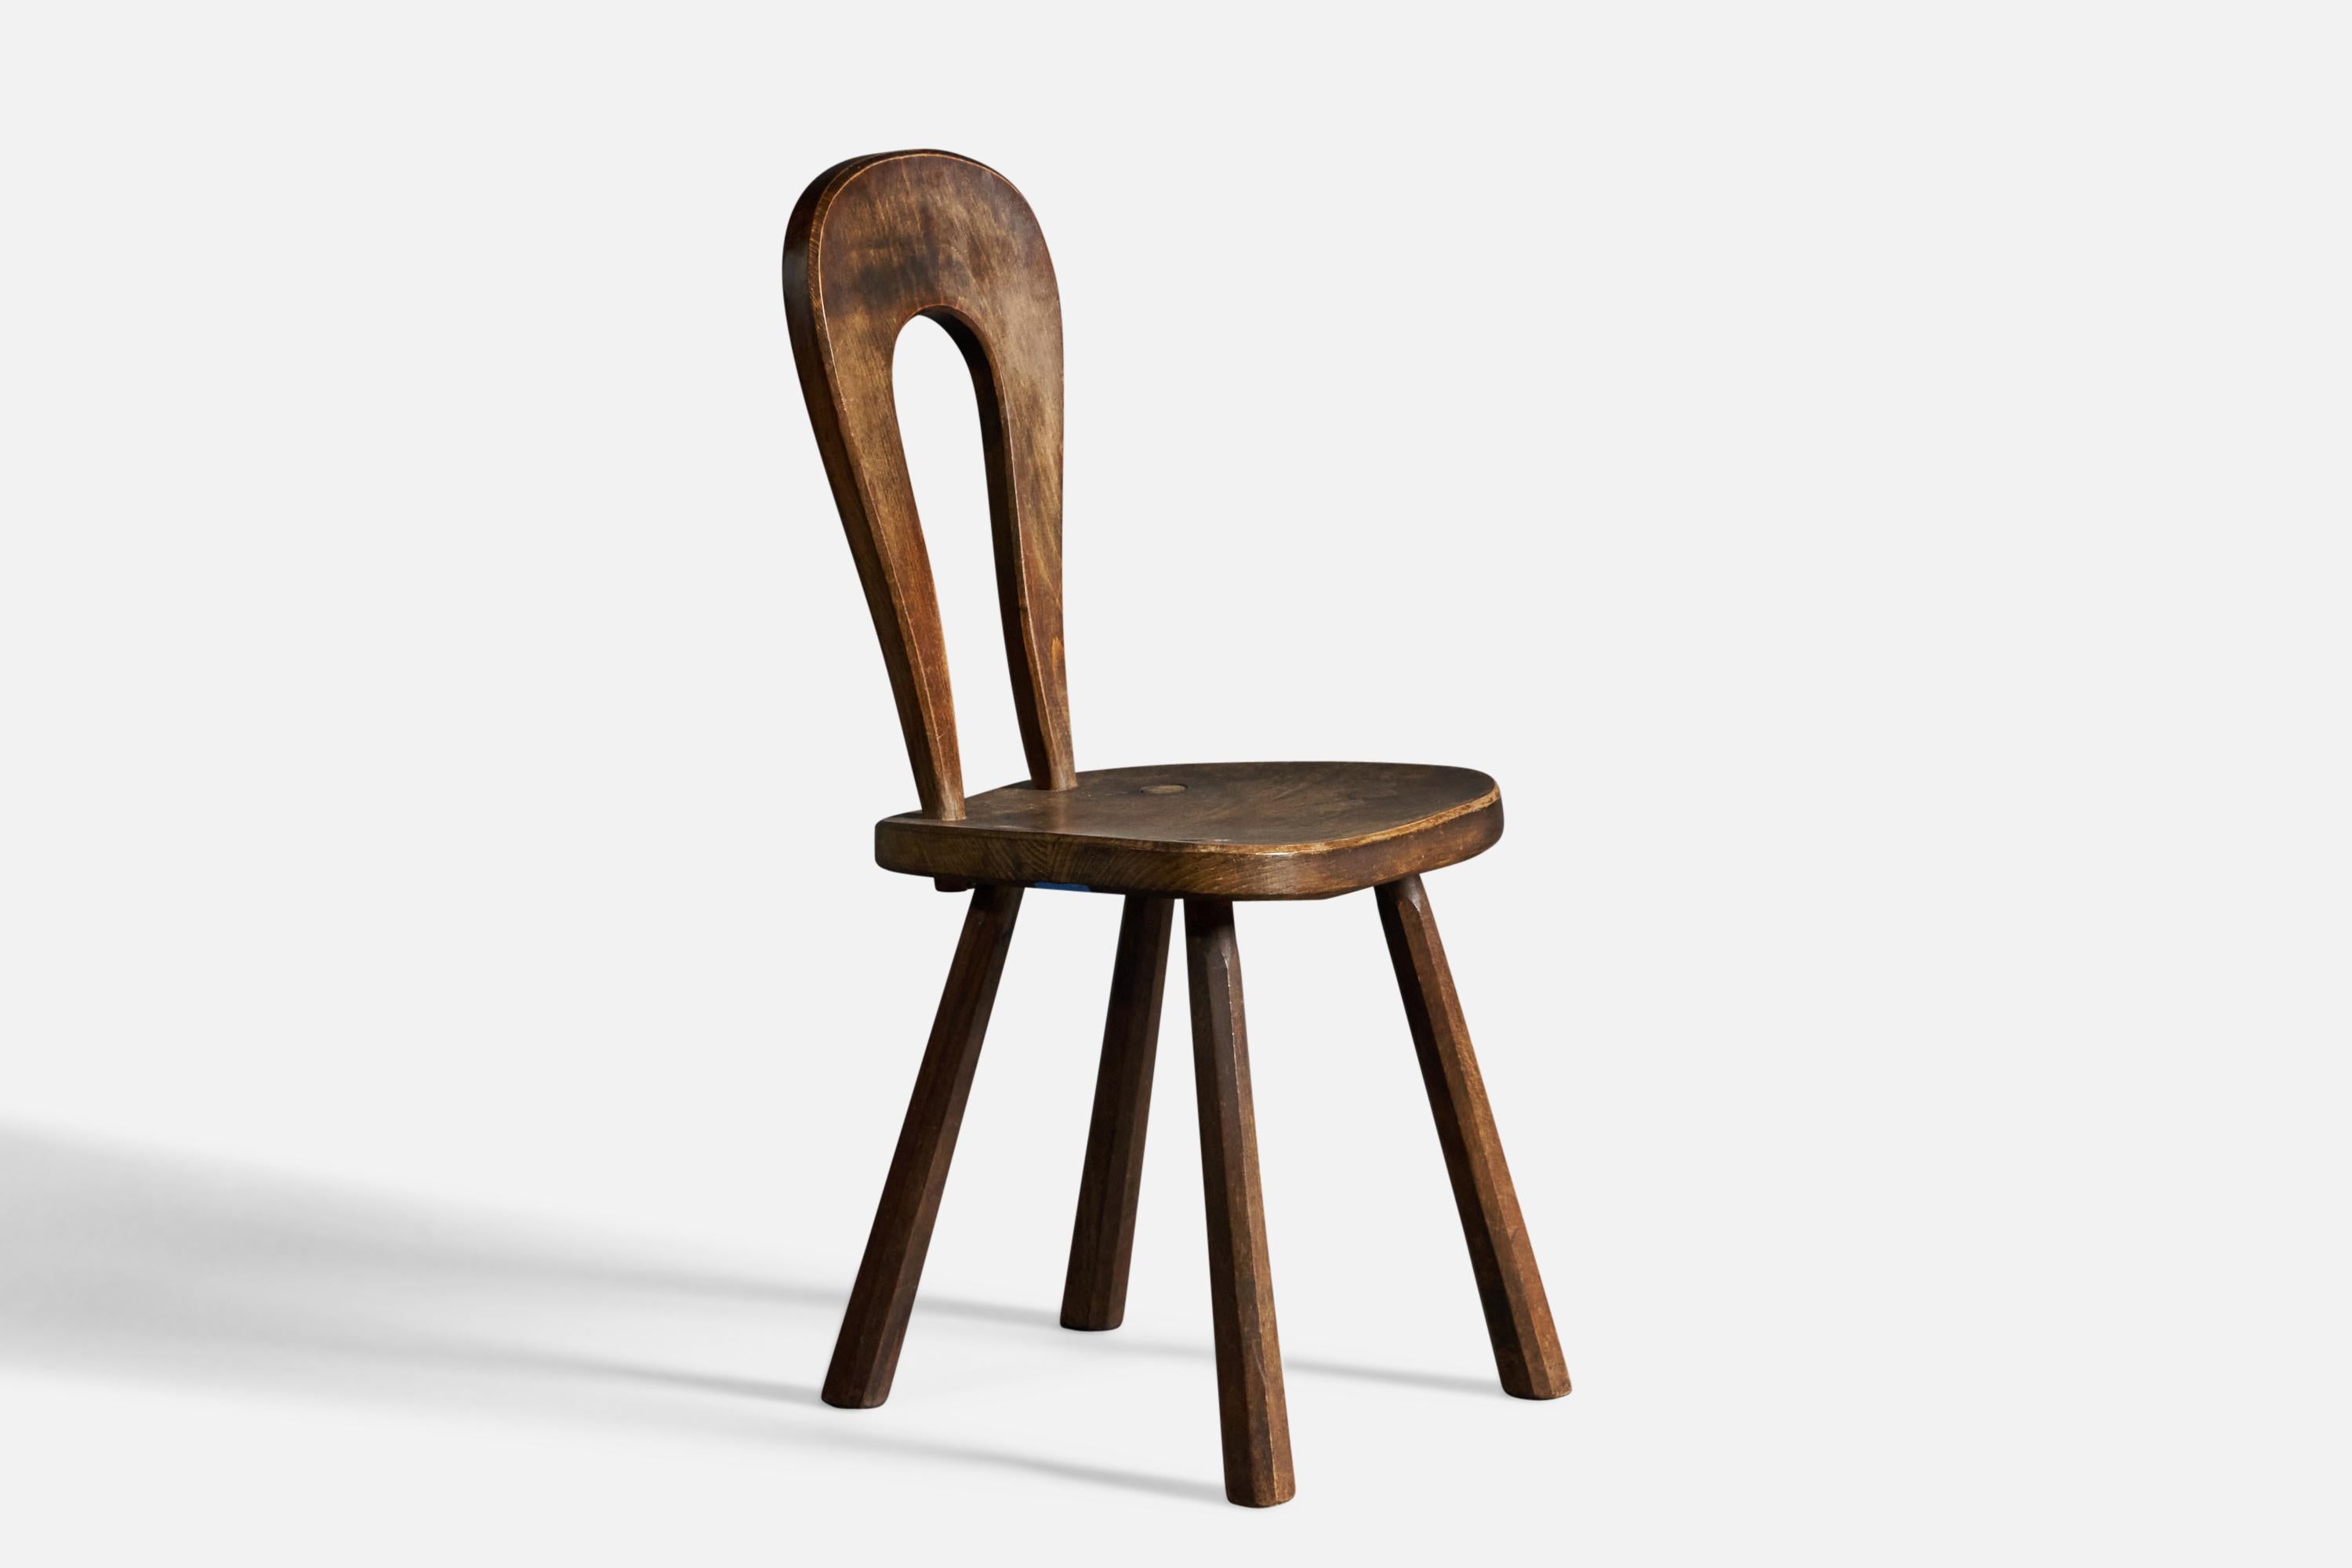 A stained oak side chair attributed to Atelier Marolles, France, 1960s.

18” seat height